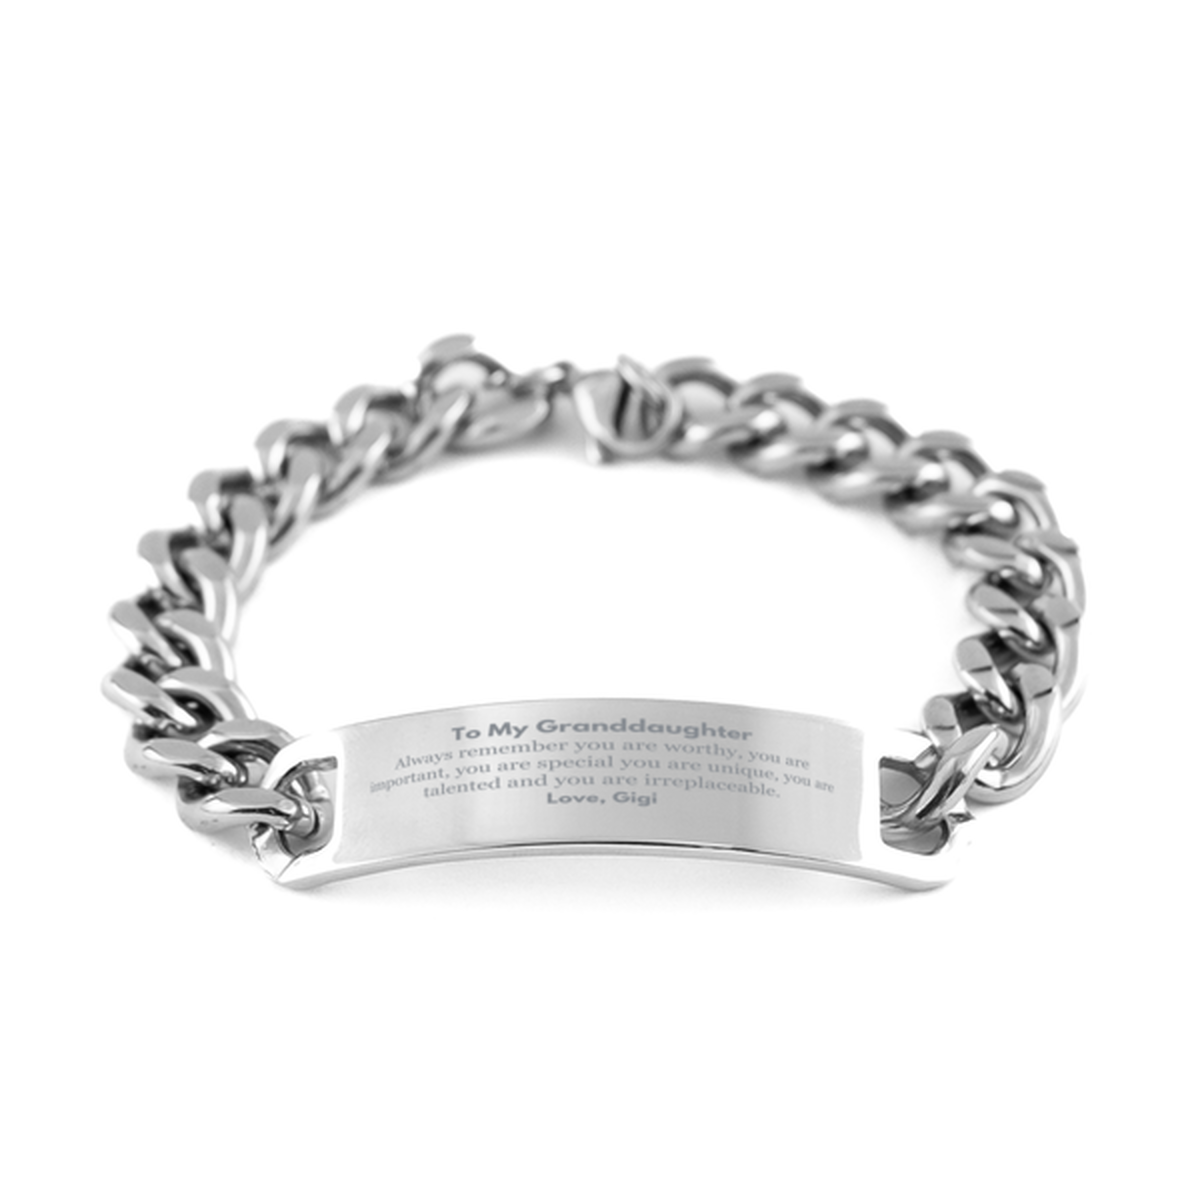 Granddaughter Birthday Gifts from Gigi, Inspirational Cuban Chain Stainless Steel Bracelet for Granddaughter Christmas Graduation Gifts for Granddaughter Always remember you are worthy, you are important. Love, Gigi